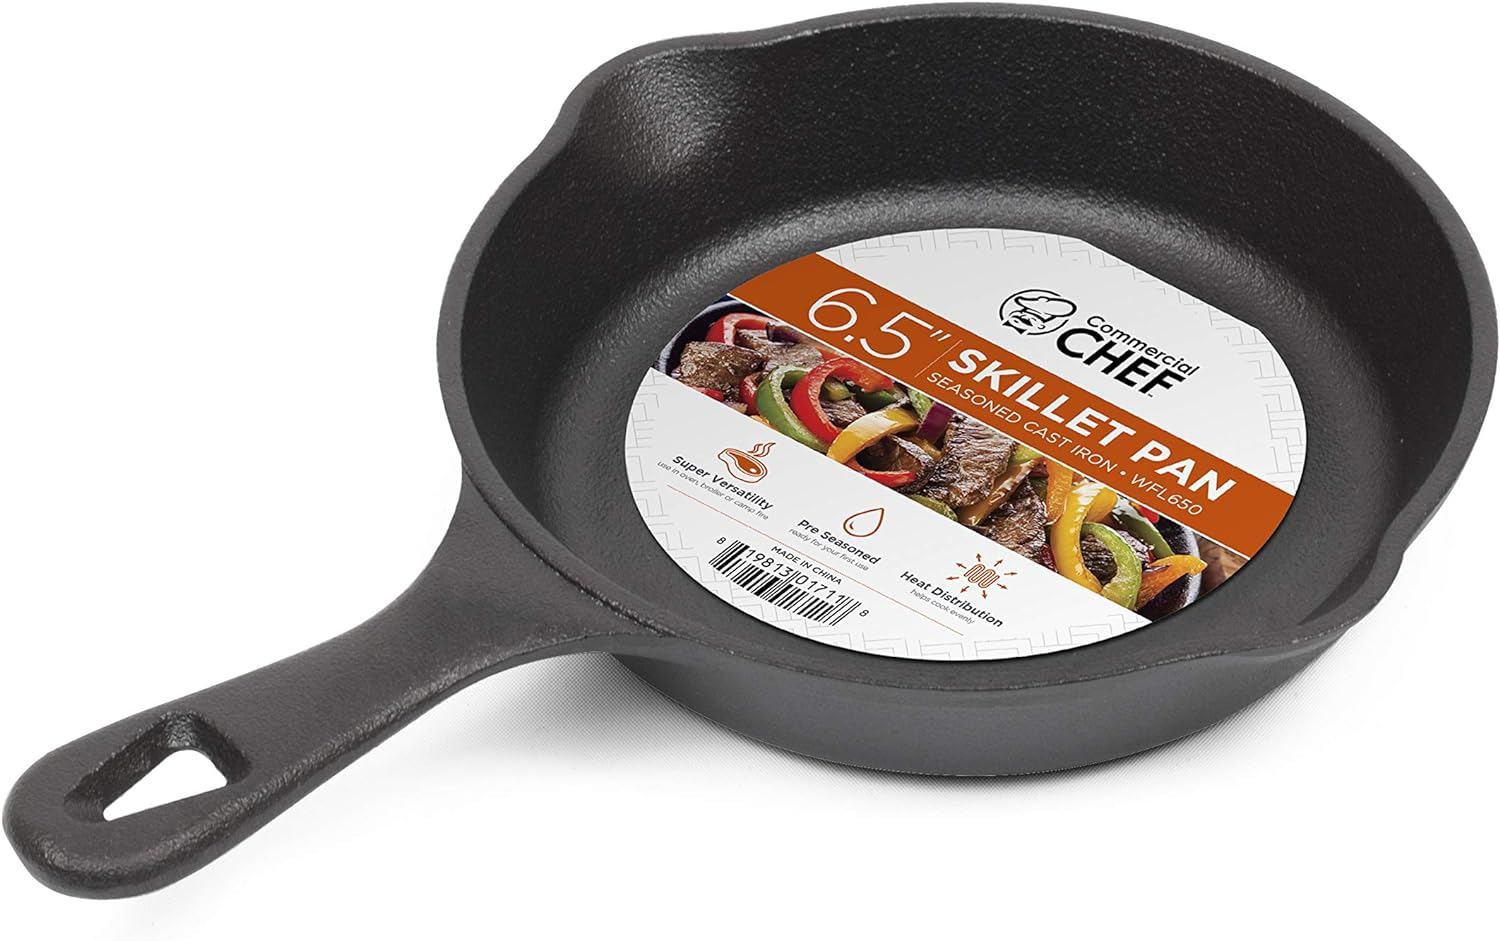 COMMERCIAL CHEF 6.5 Inch Cast Iron Skillet, Black